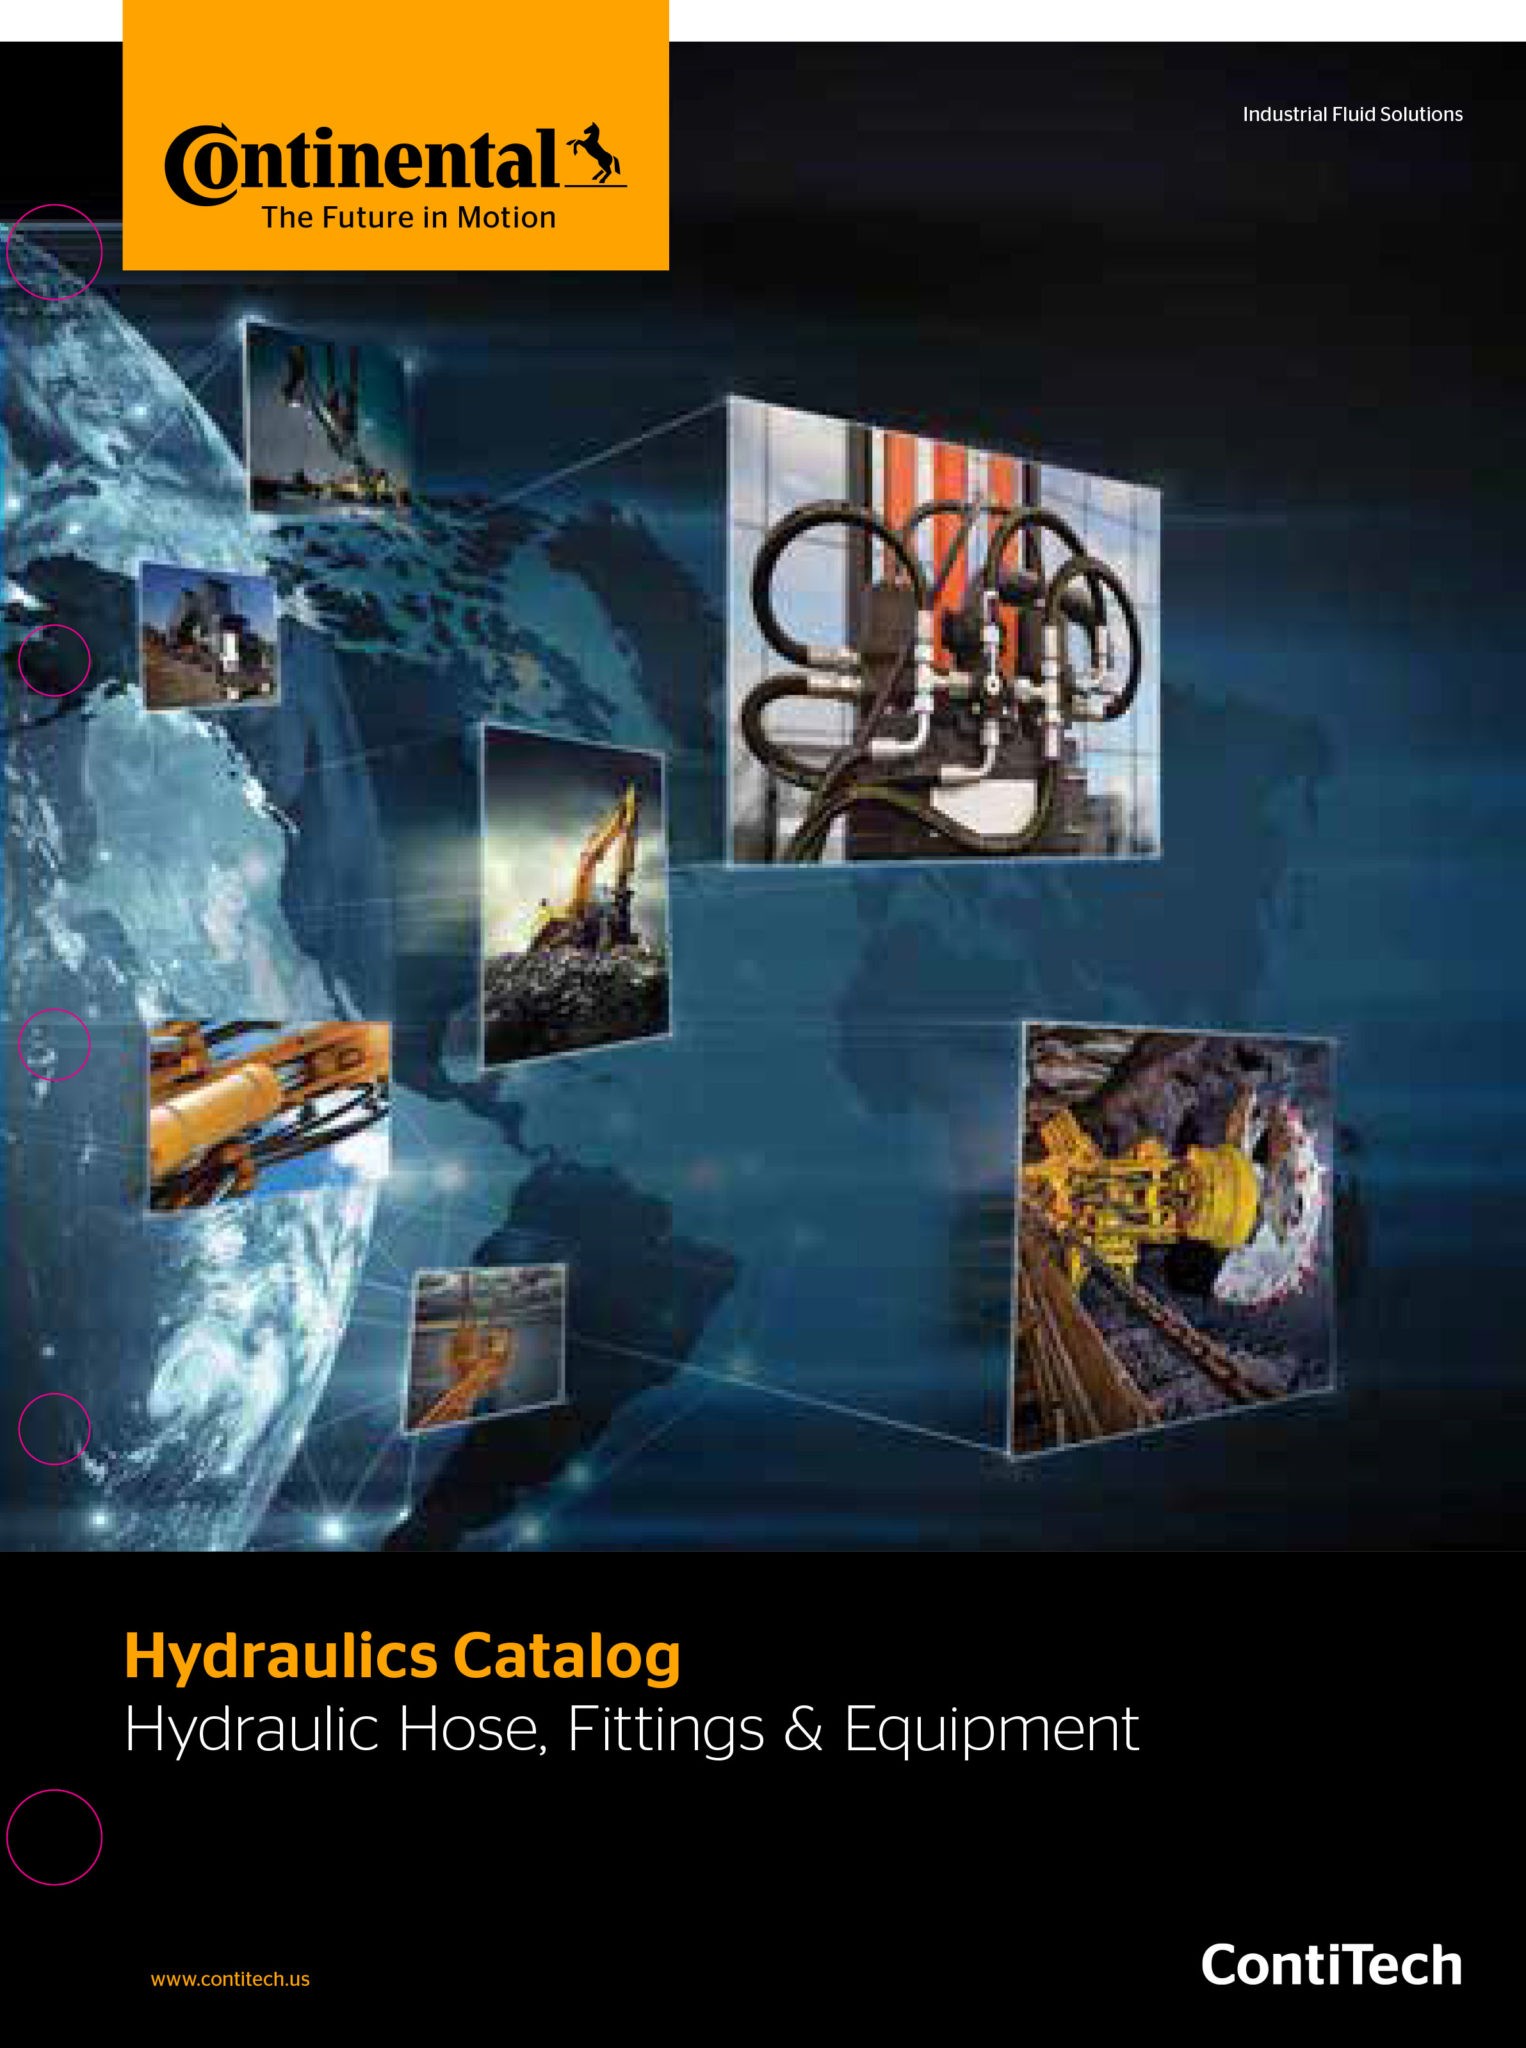 Hydraulic Hose, Fittings and Equipment